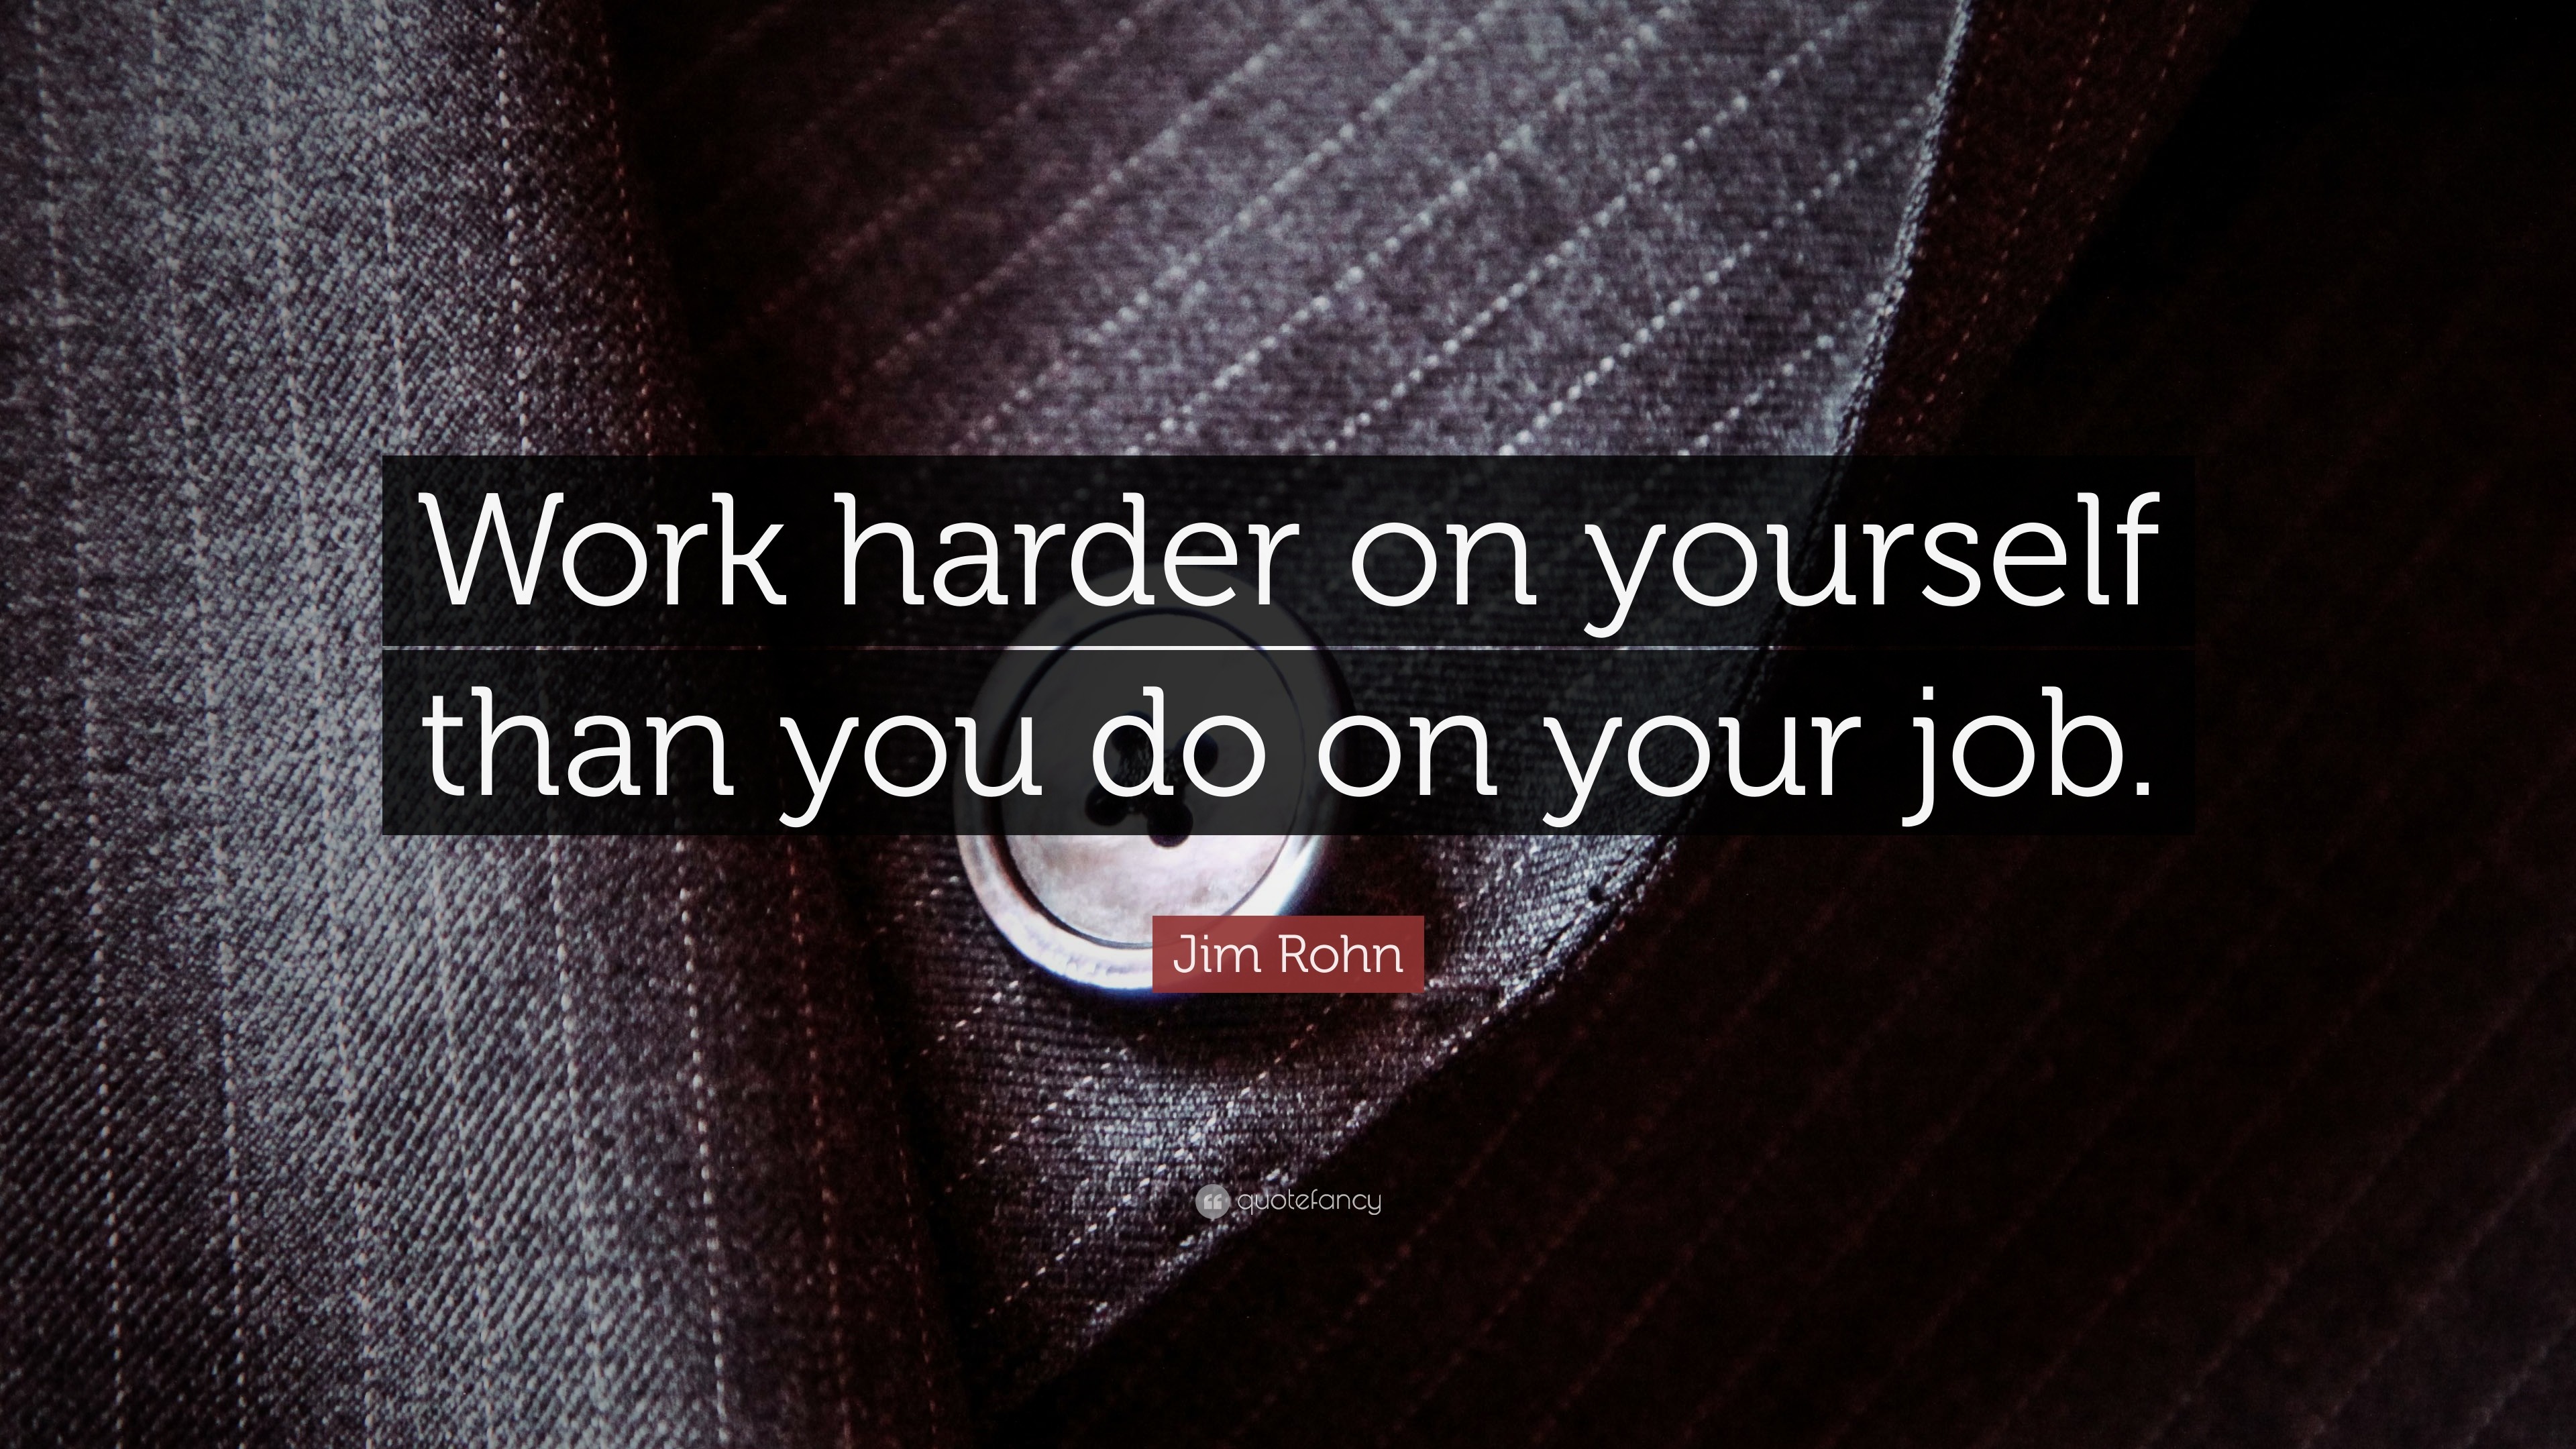 Spiritual Quotes Work harder on yourself than you do on your job.